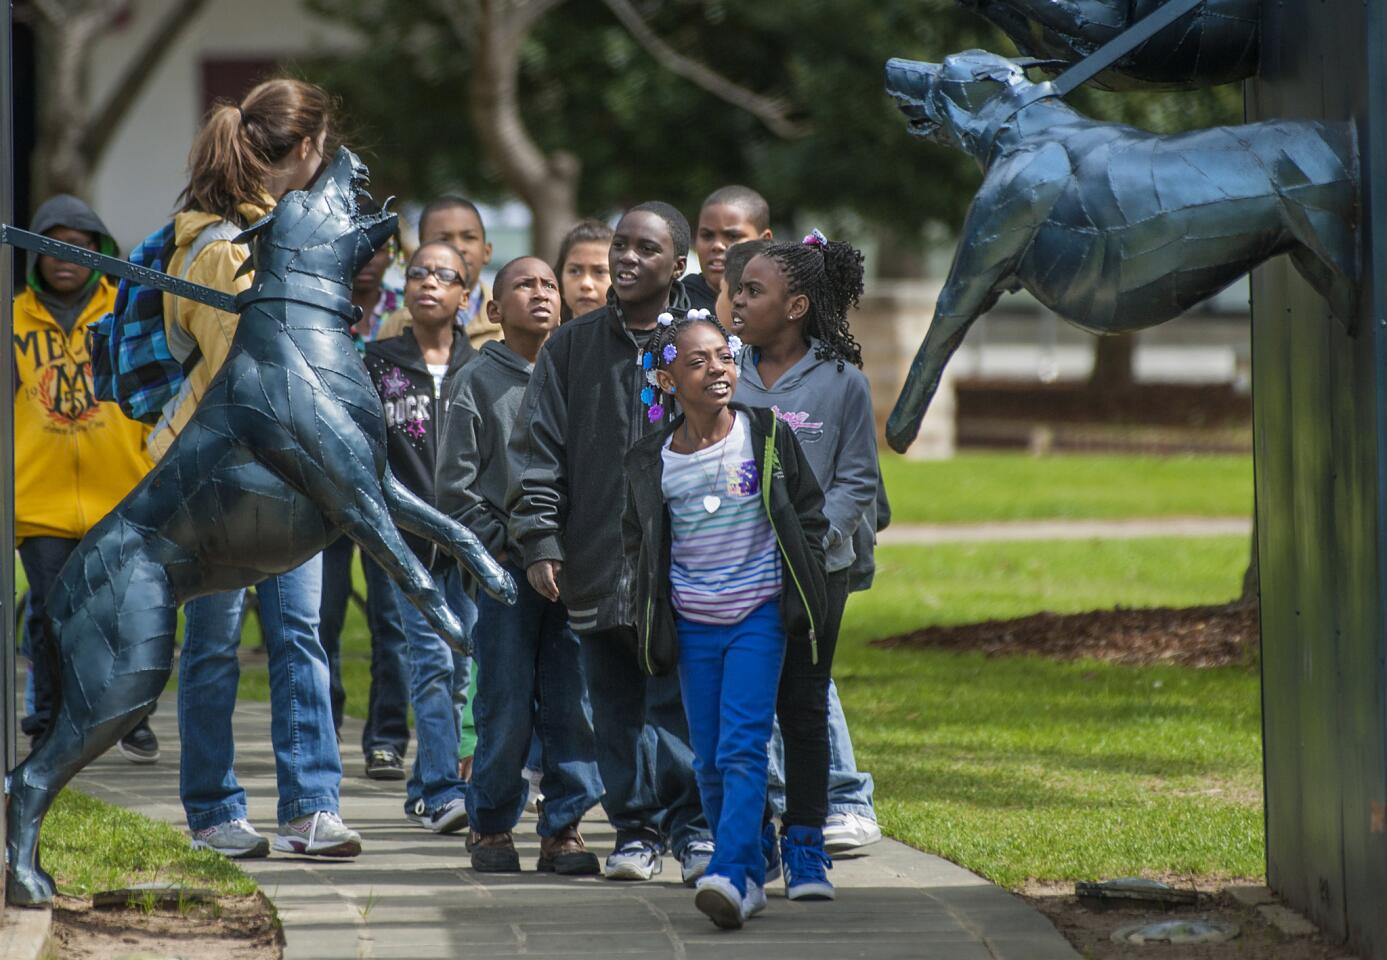 Schoolchildren visit Kelly Ingram Park in Birmingham, Ala., which is embracing its civil rights legacy. The park is the site of statues and sculptures that commemorate and, in some cases, depict the civil rights movement and the city's notorious response: police dogs, fire hoses, jail time.